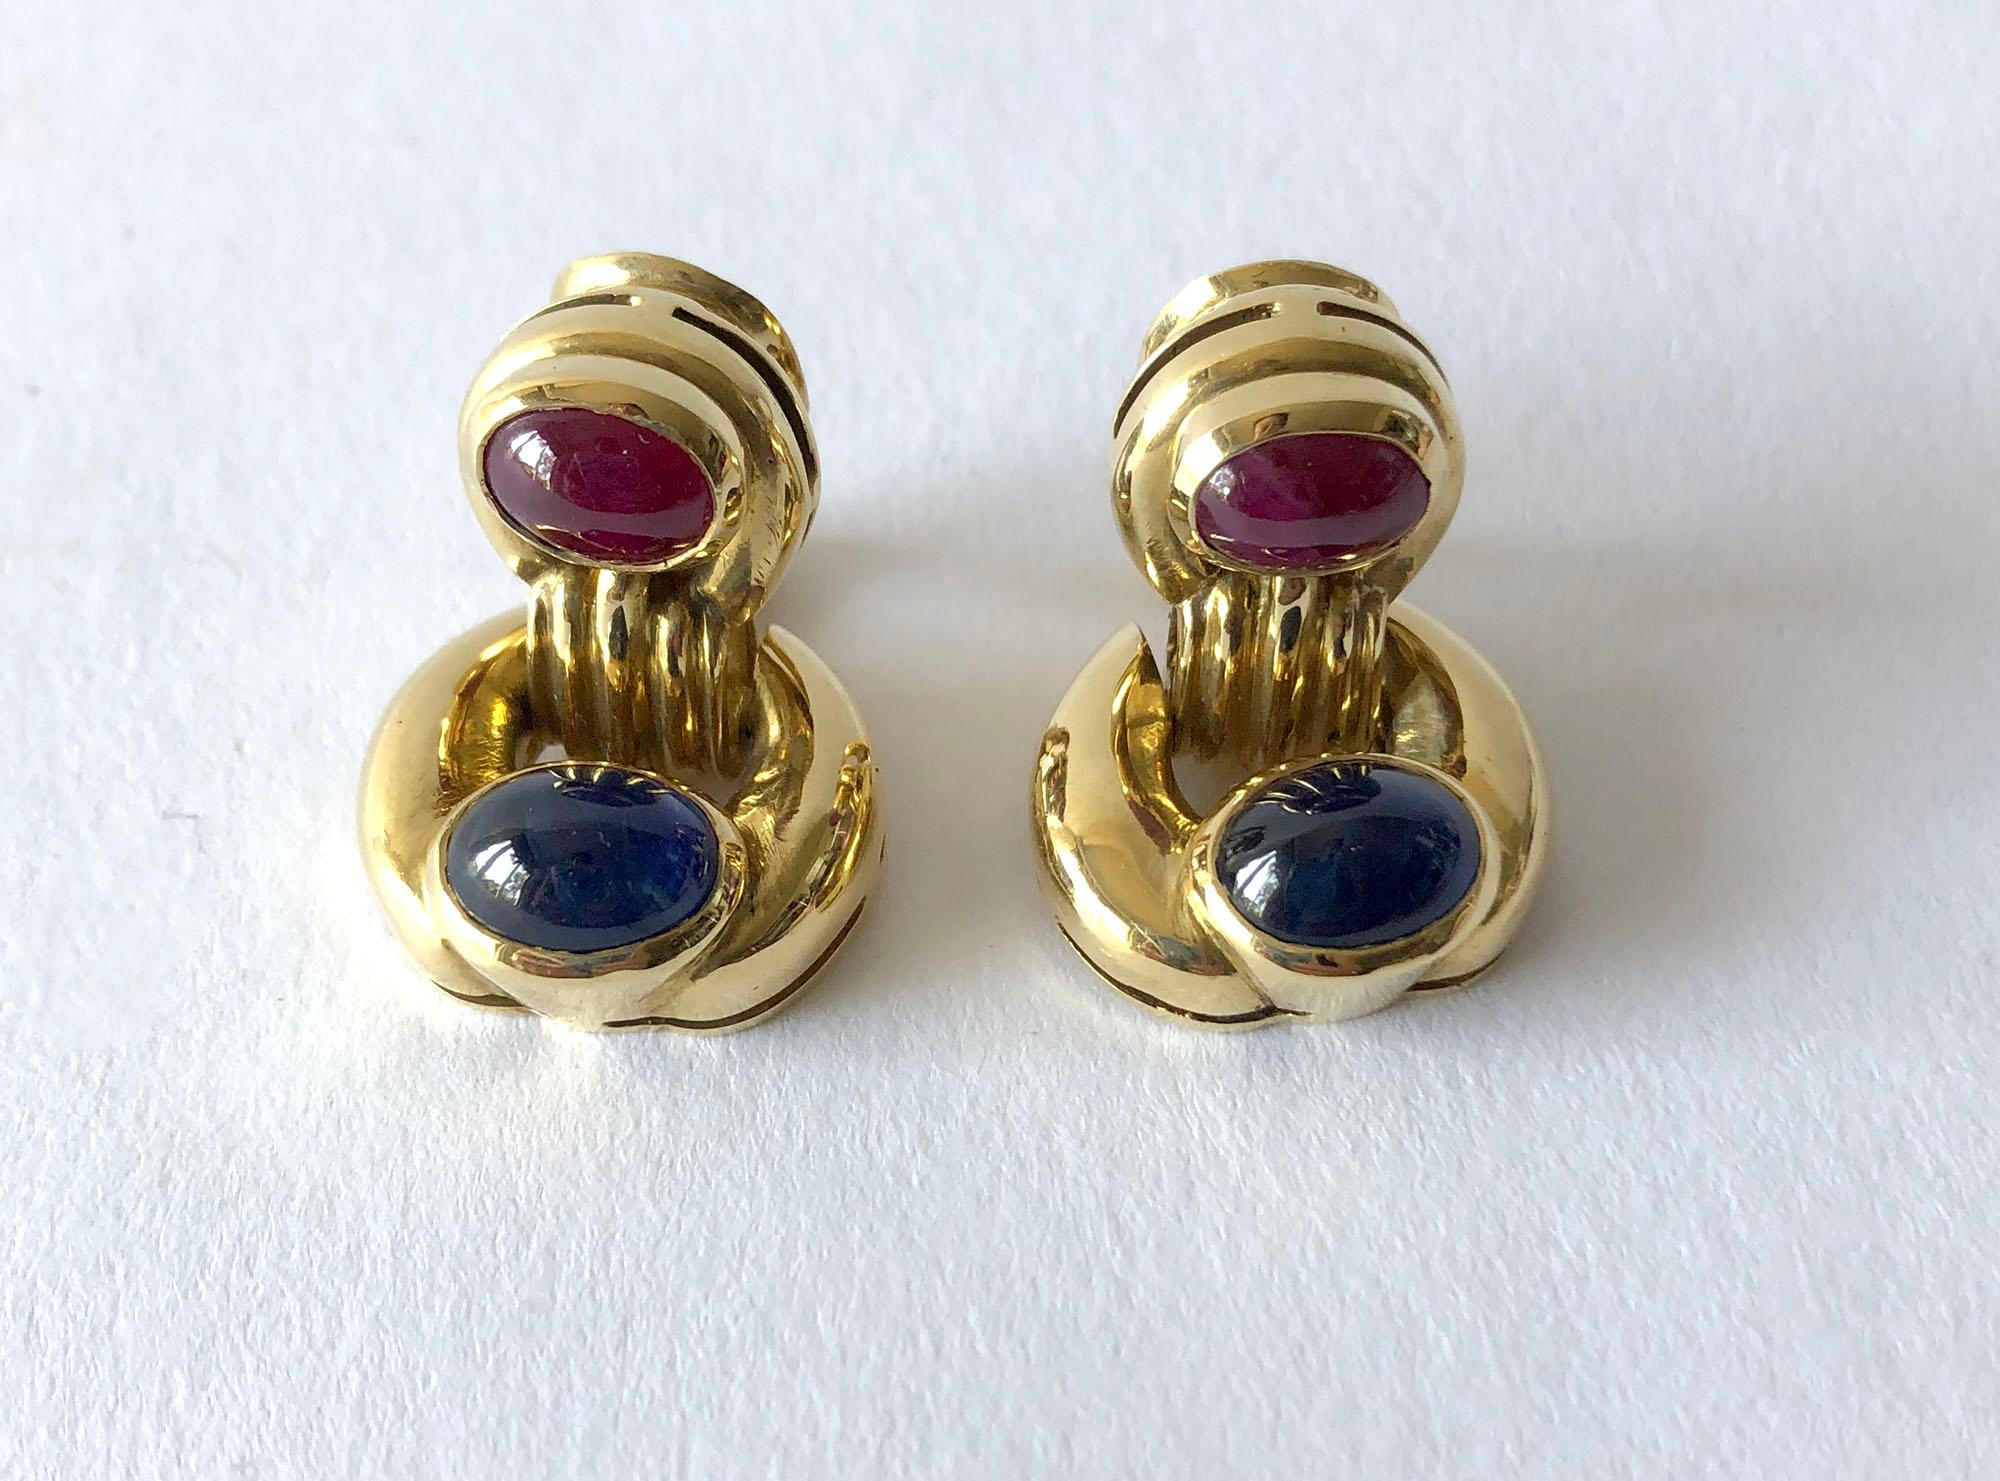 Door knocker earrings featuring oval-shaped ruby and sapphire cabochons set in 18k gold.  Earrings measure 1  1/8